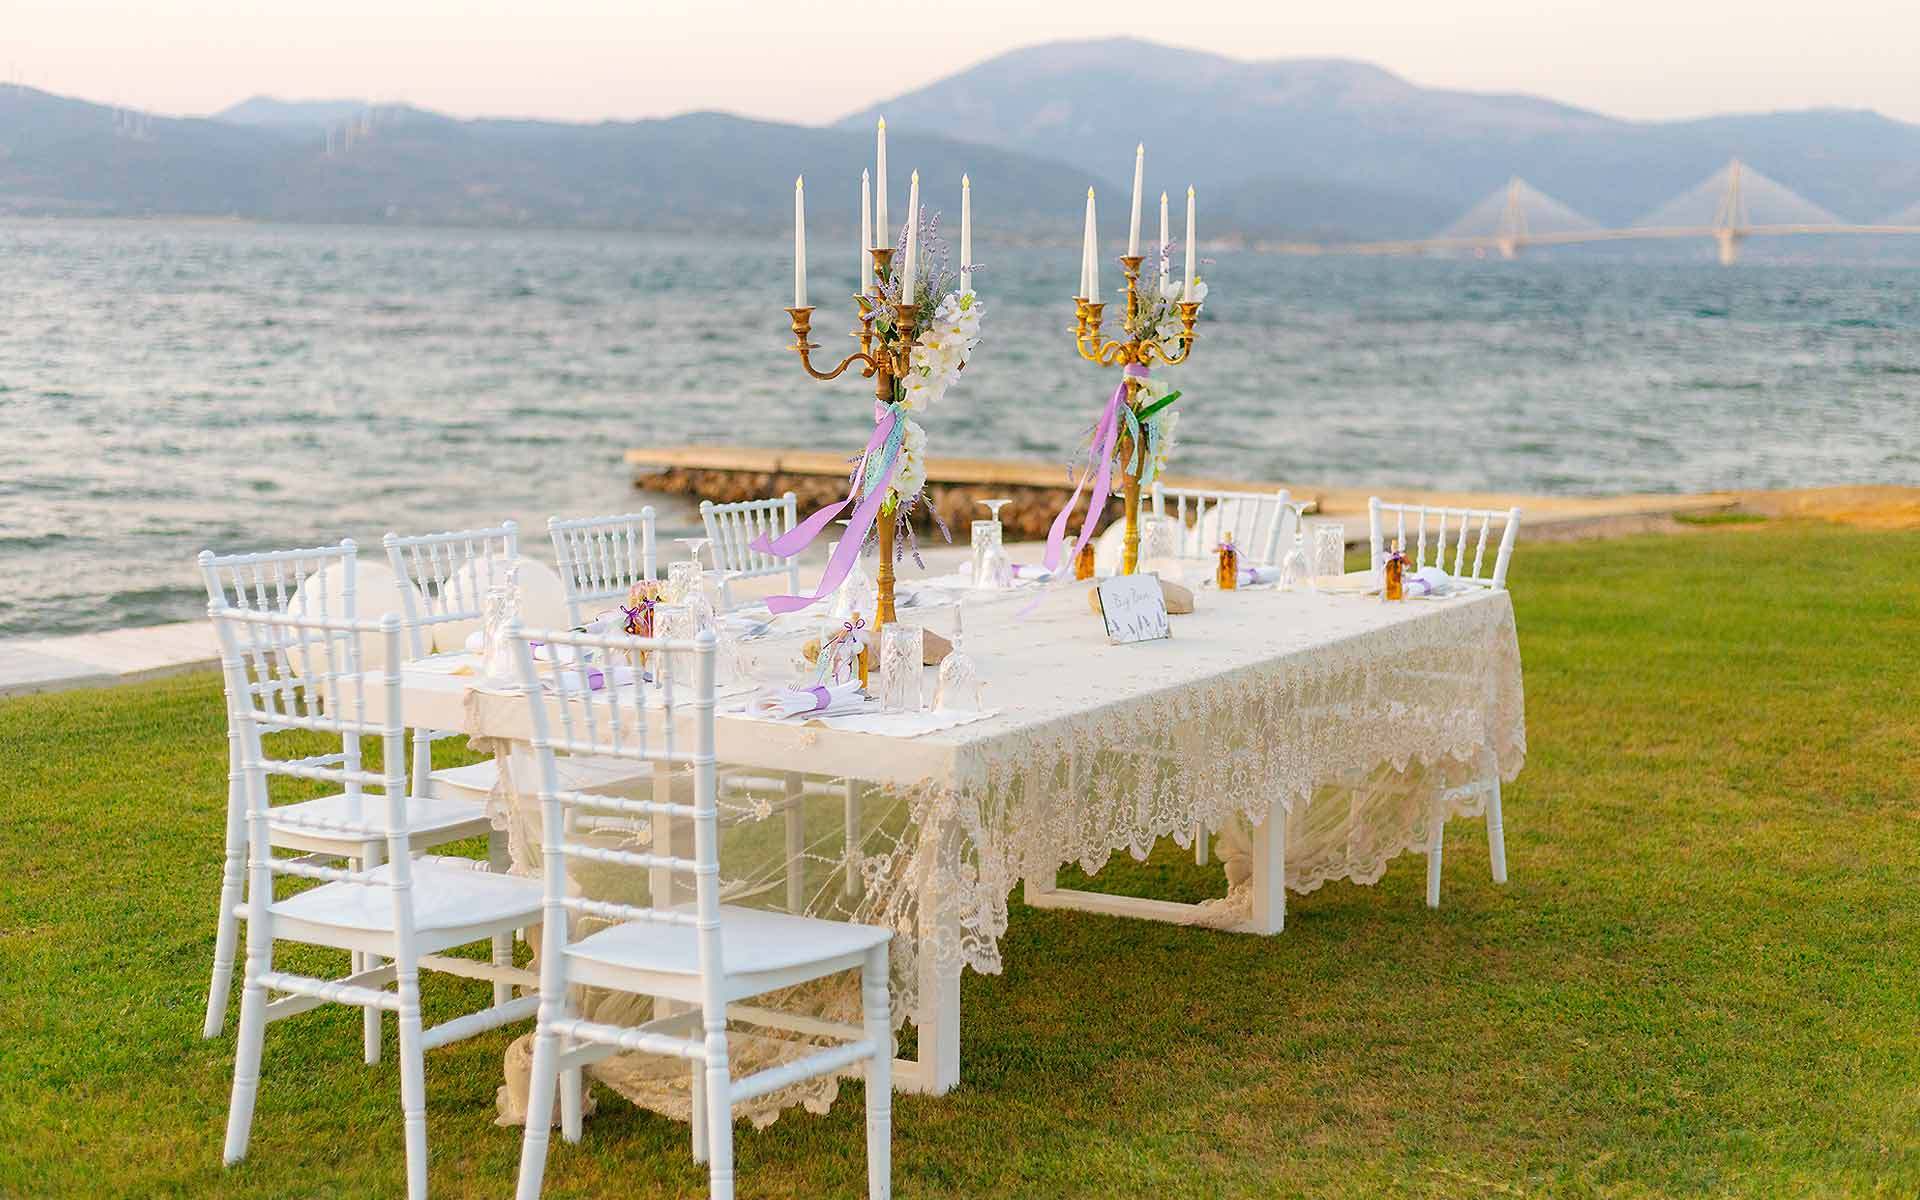 Beach-wedding-head-table-decoration-by-Diamond-Events-Wedding-Event-planning-services